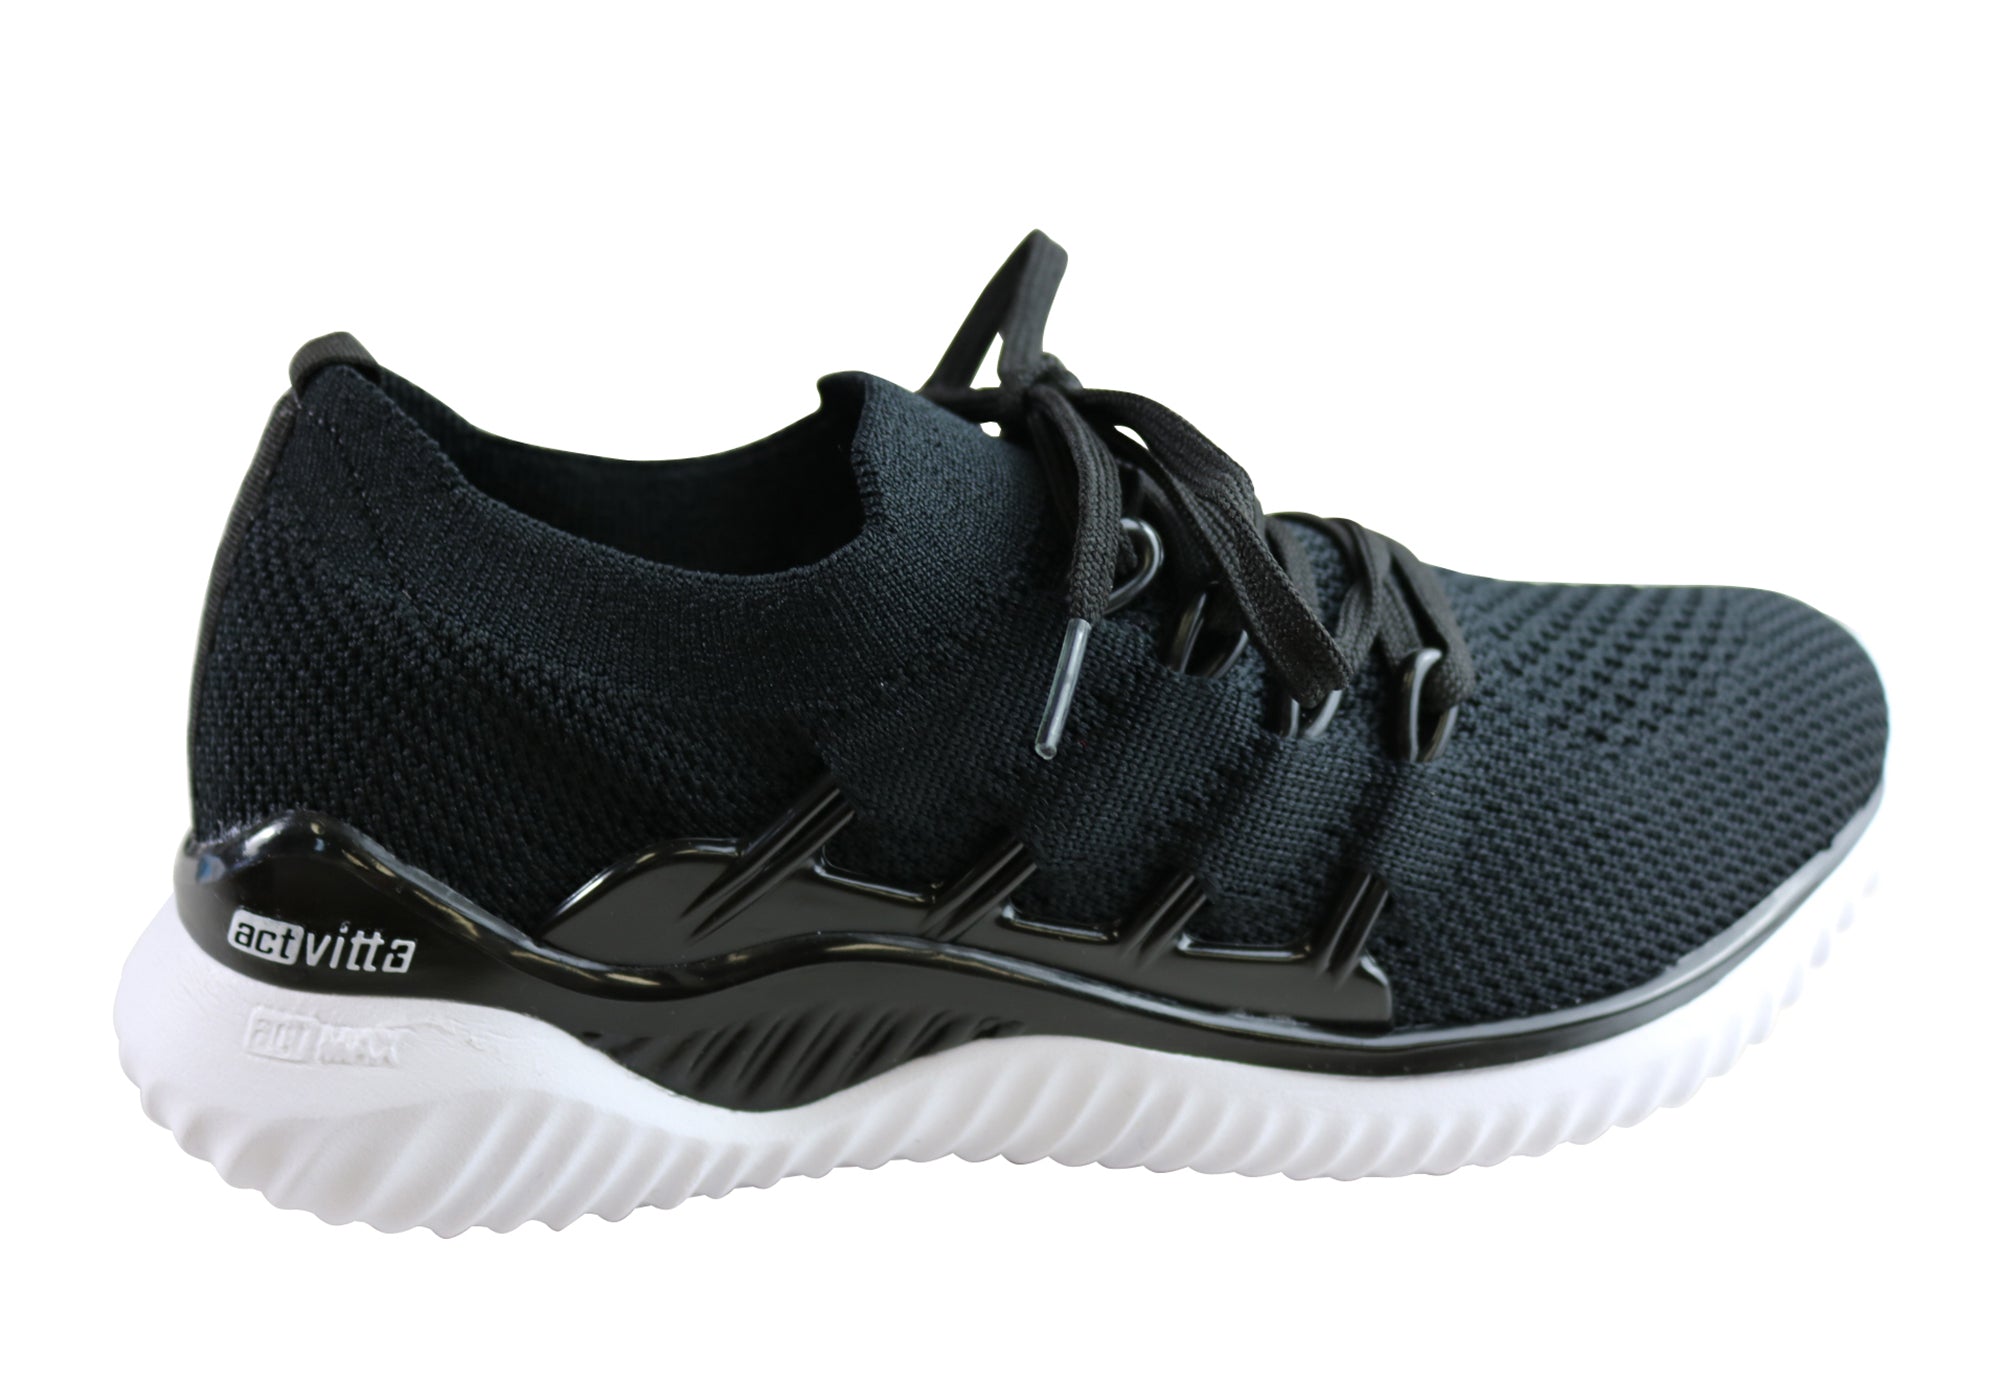 Actvitta Grid Womens Comfort Cushioned Active Shoes Made In Brazil